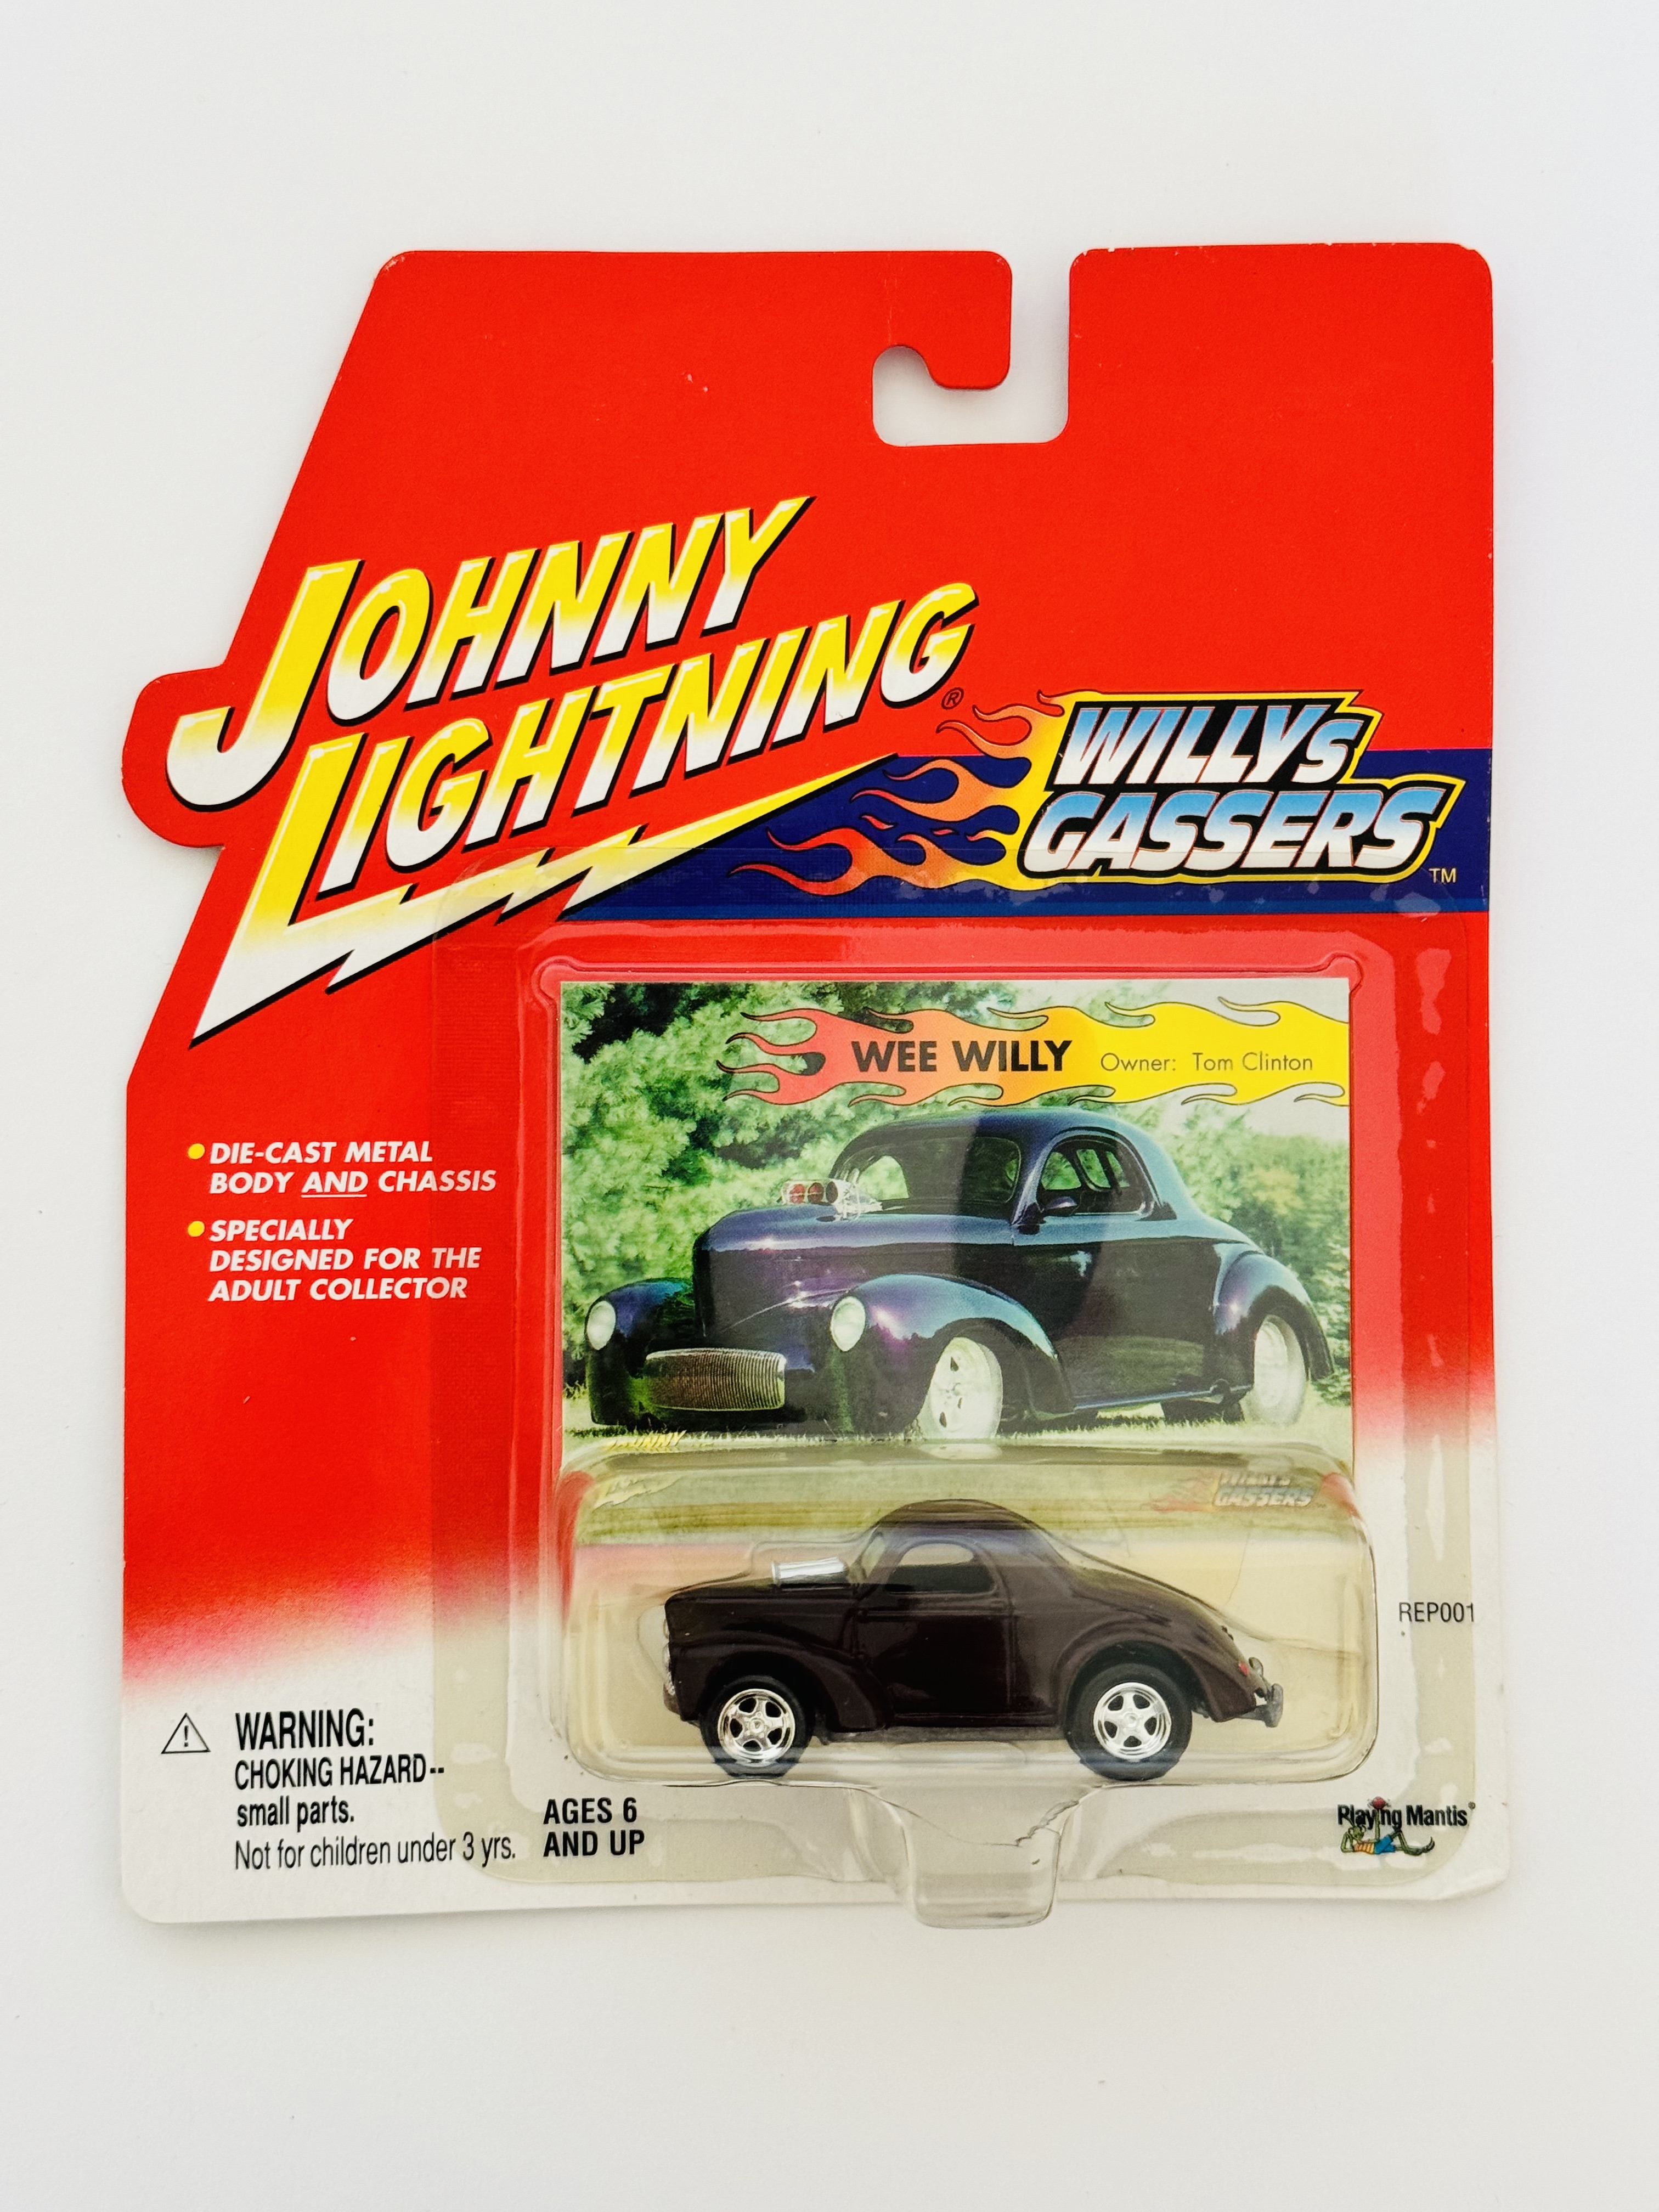 Johnny Lightning Willys Gassers Wee Willy